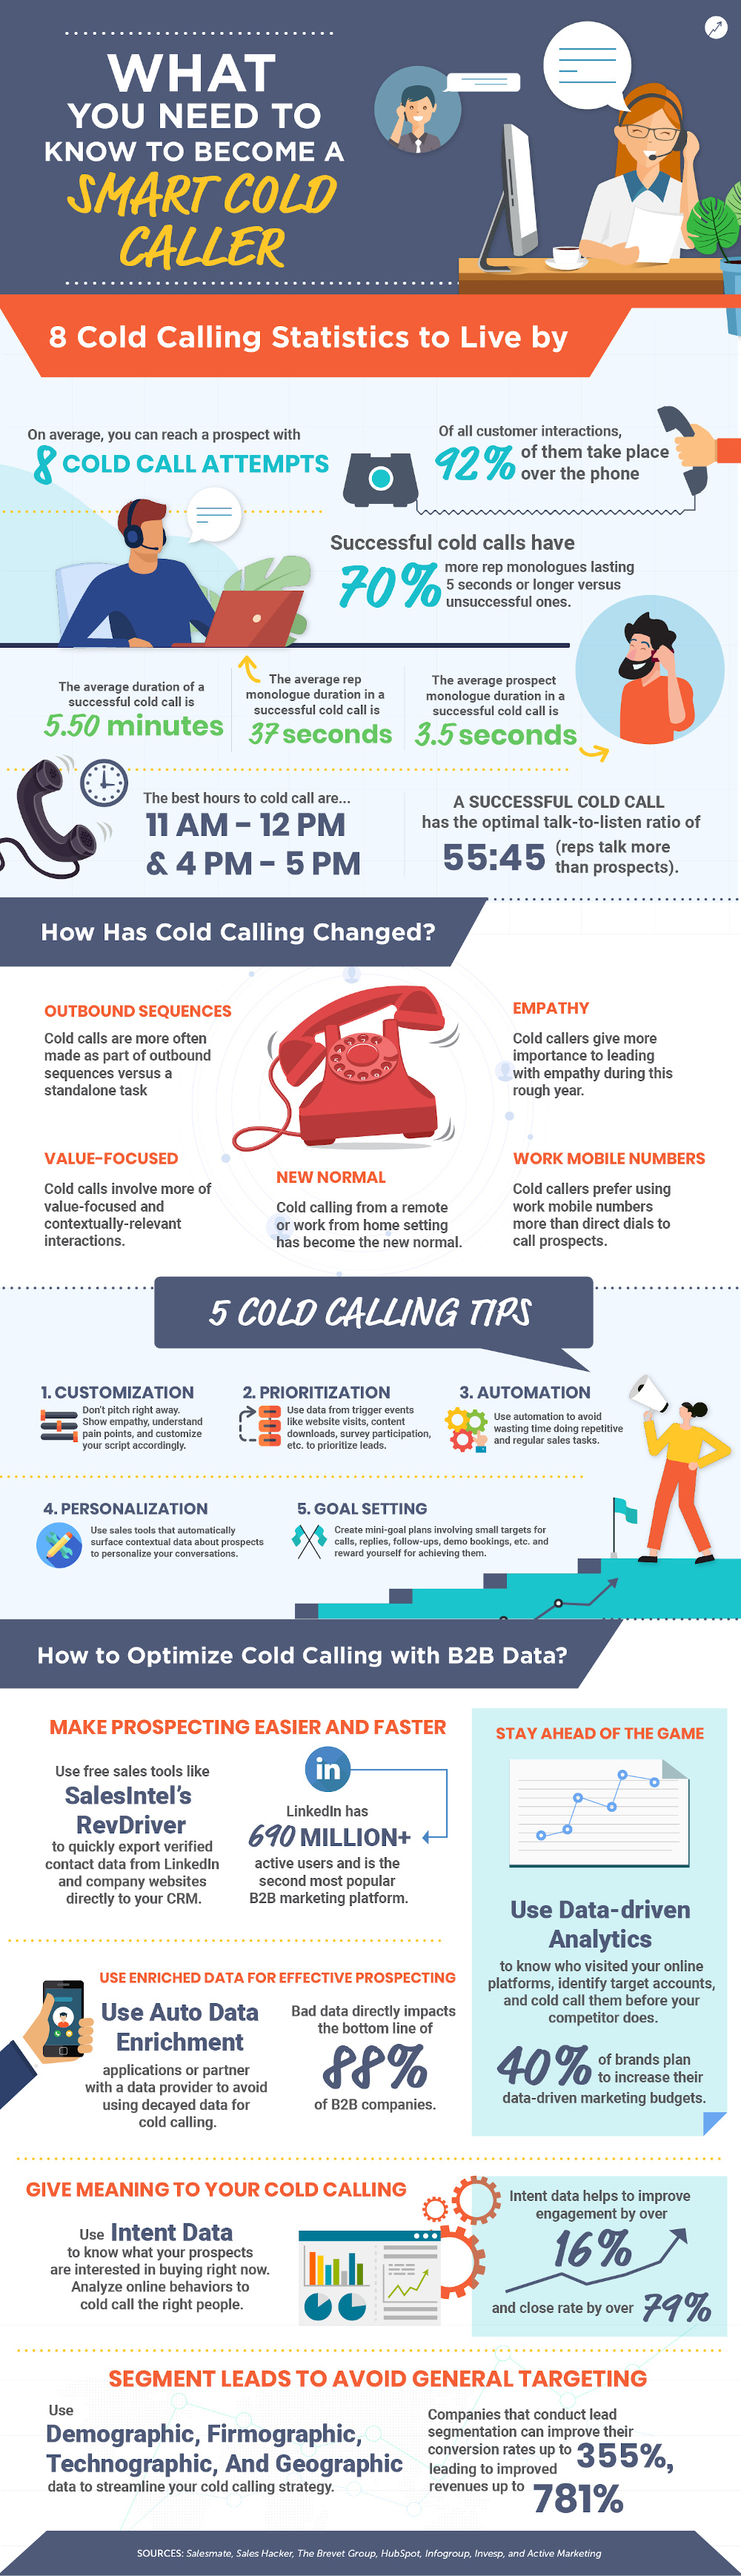 Smart cold caller tips and techniques